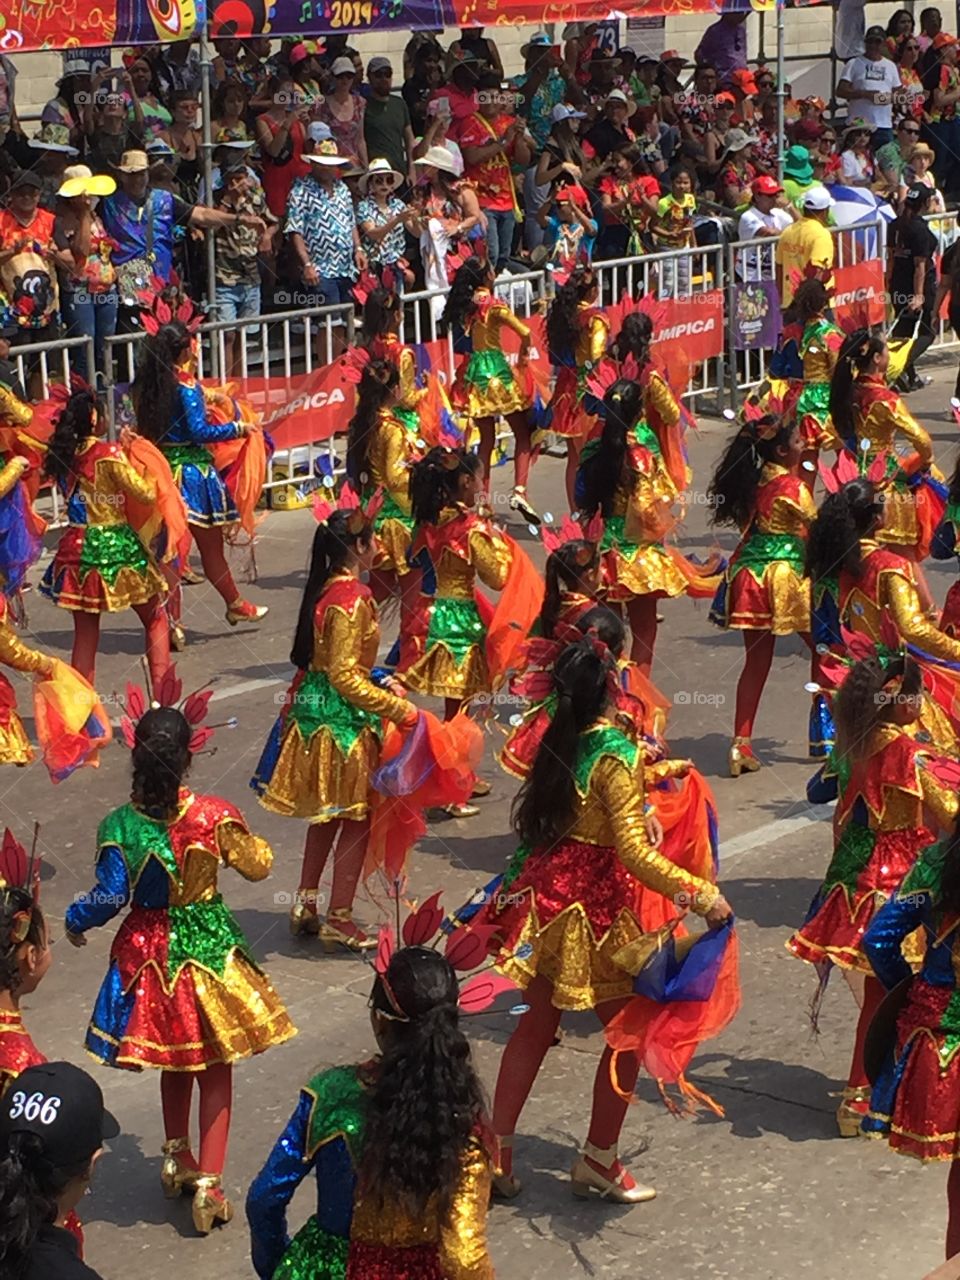 Young dancers in the Barranquilla Carnival